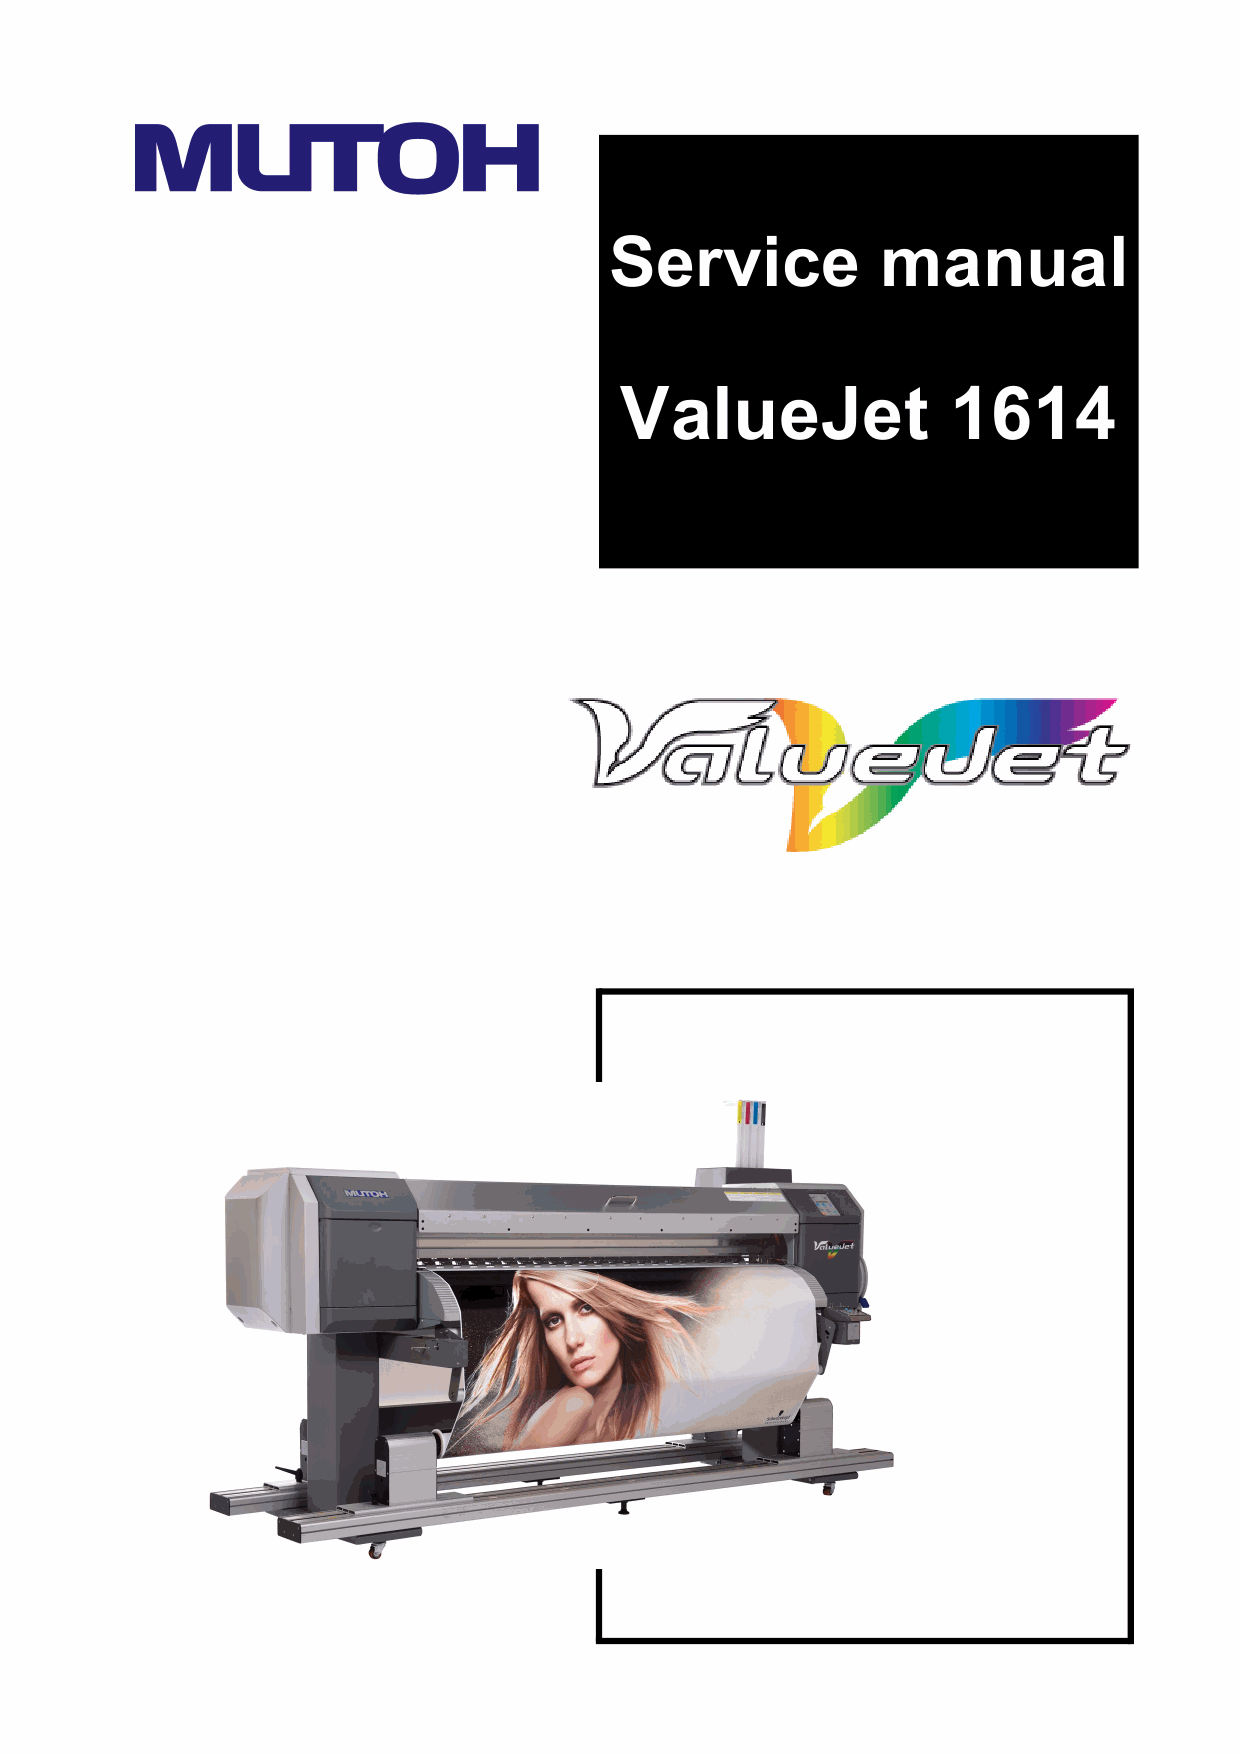 MUTOH ValueJet VJ 1614 Service and Parts Manual-1